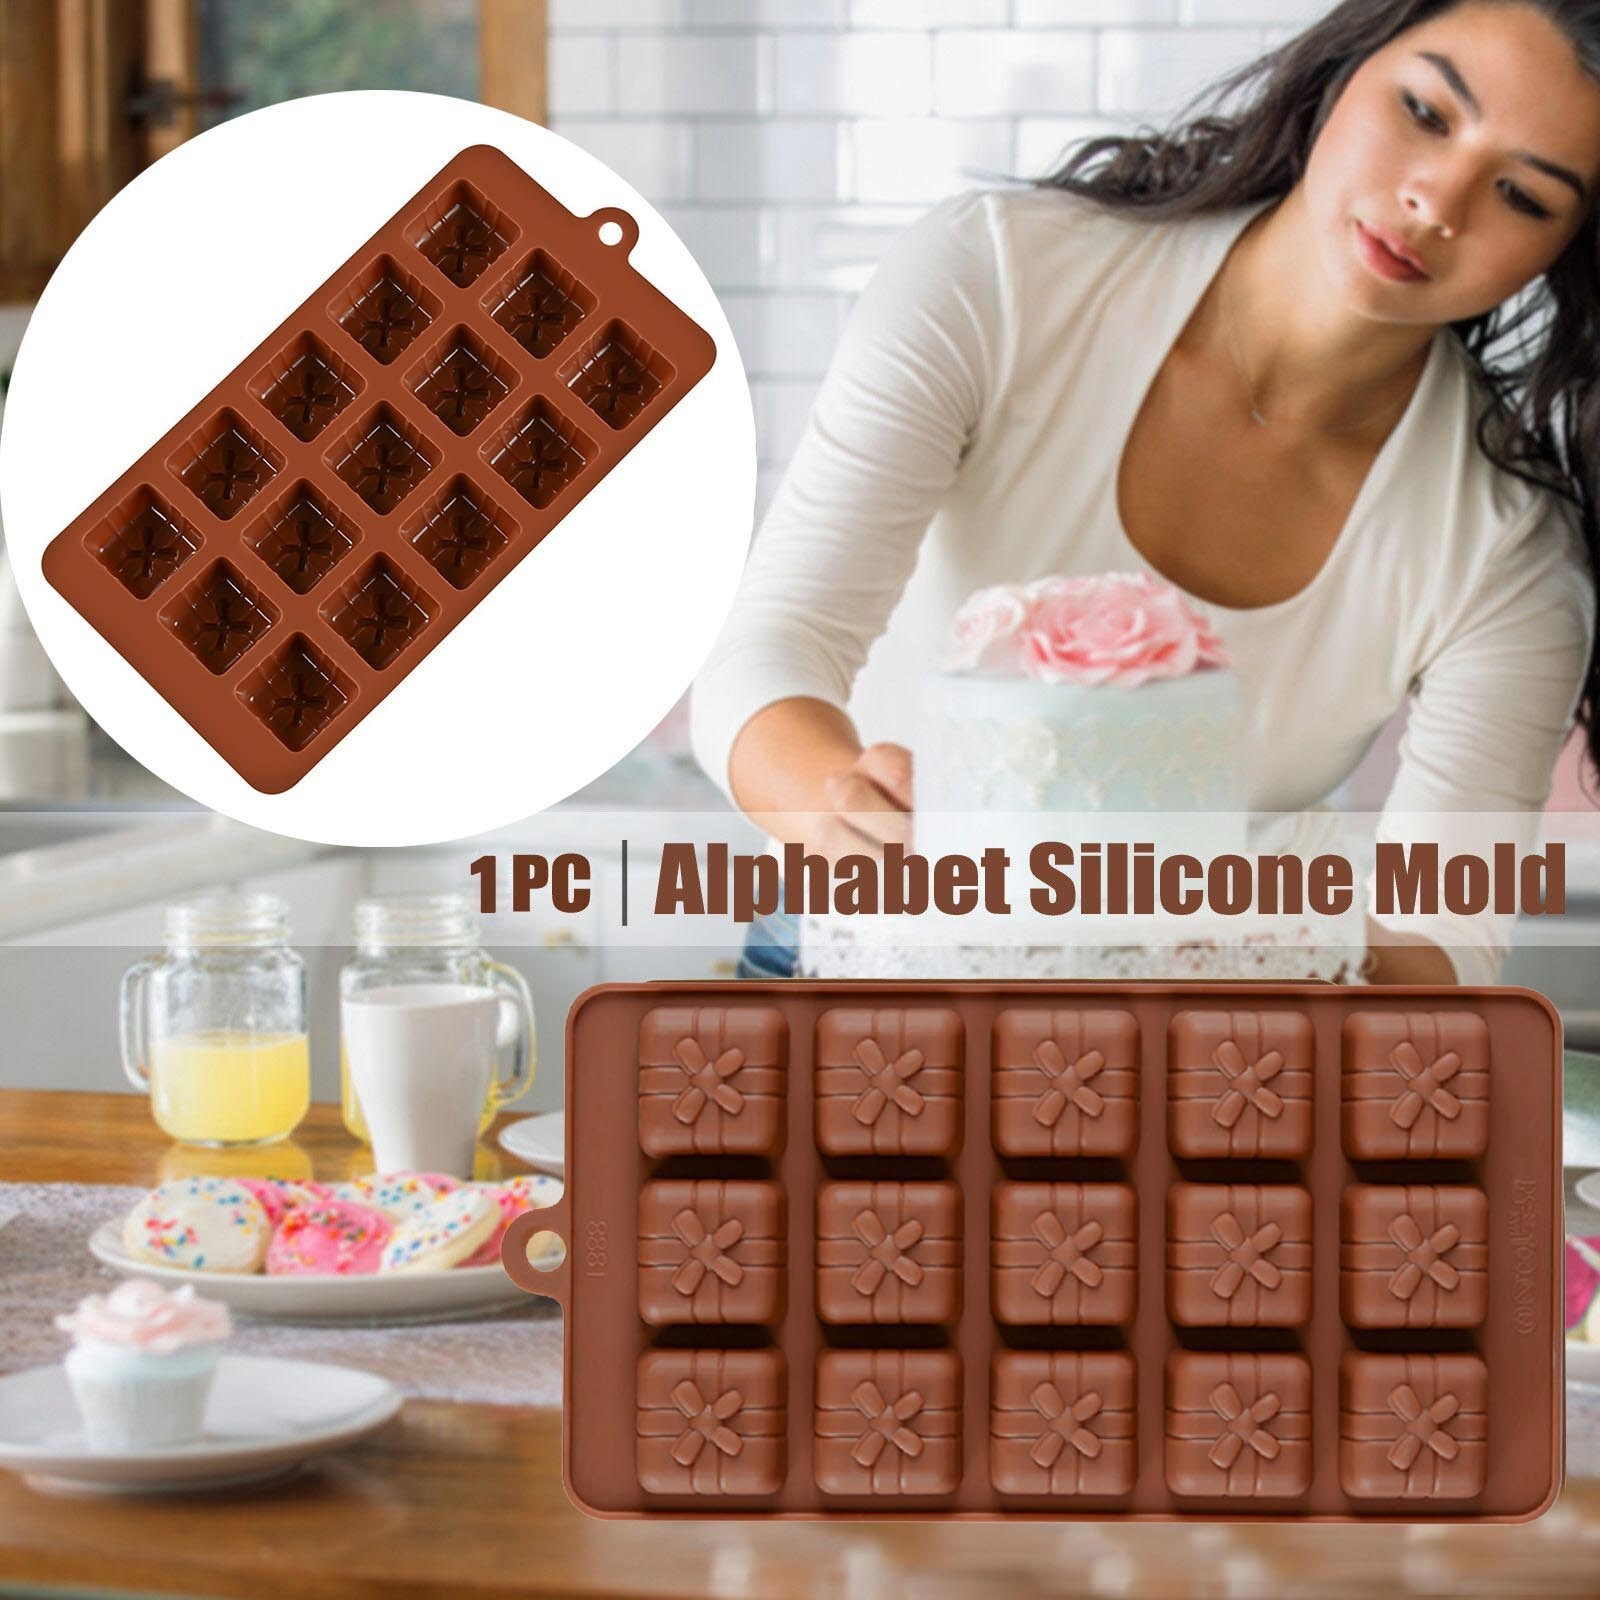 15 Holes Silicone Mold For Chocolate Cake Jelly Pudding Cake Pastry Baking Candy Fondant Bakeware Diy Decorating Dessert Mould